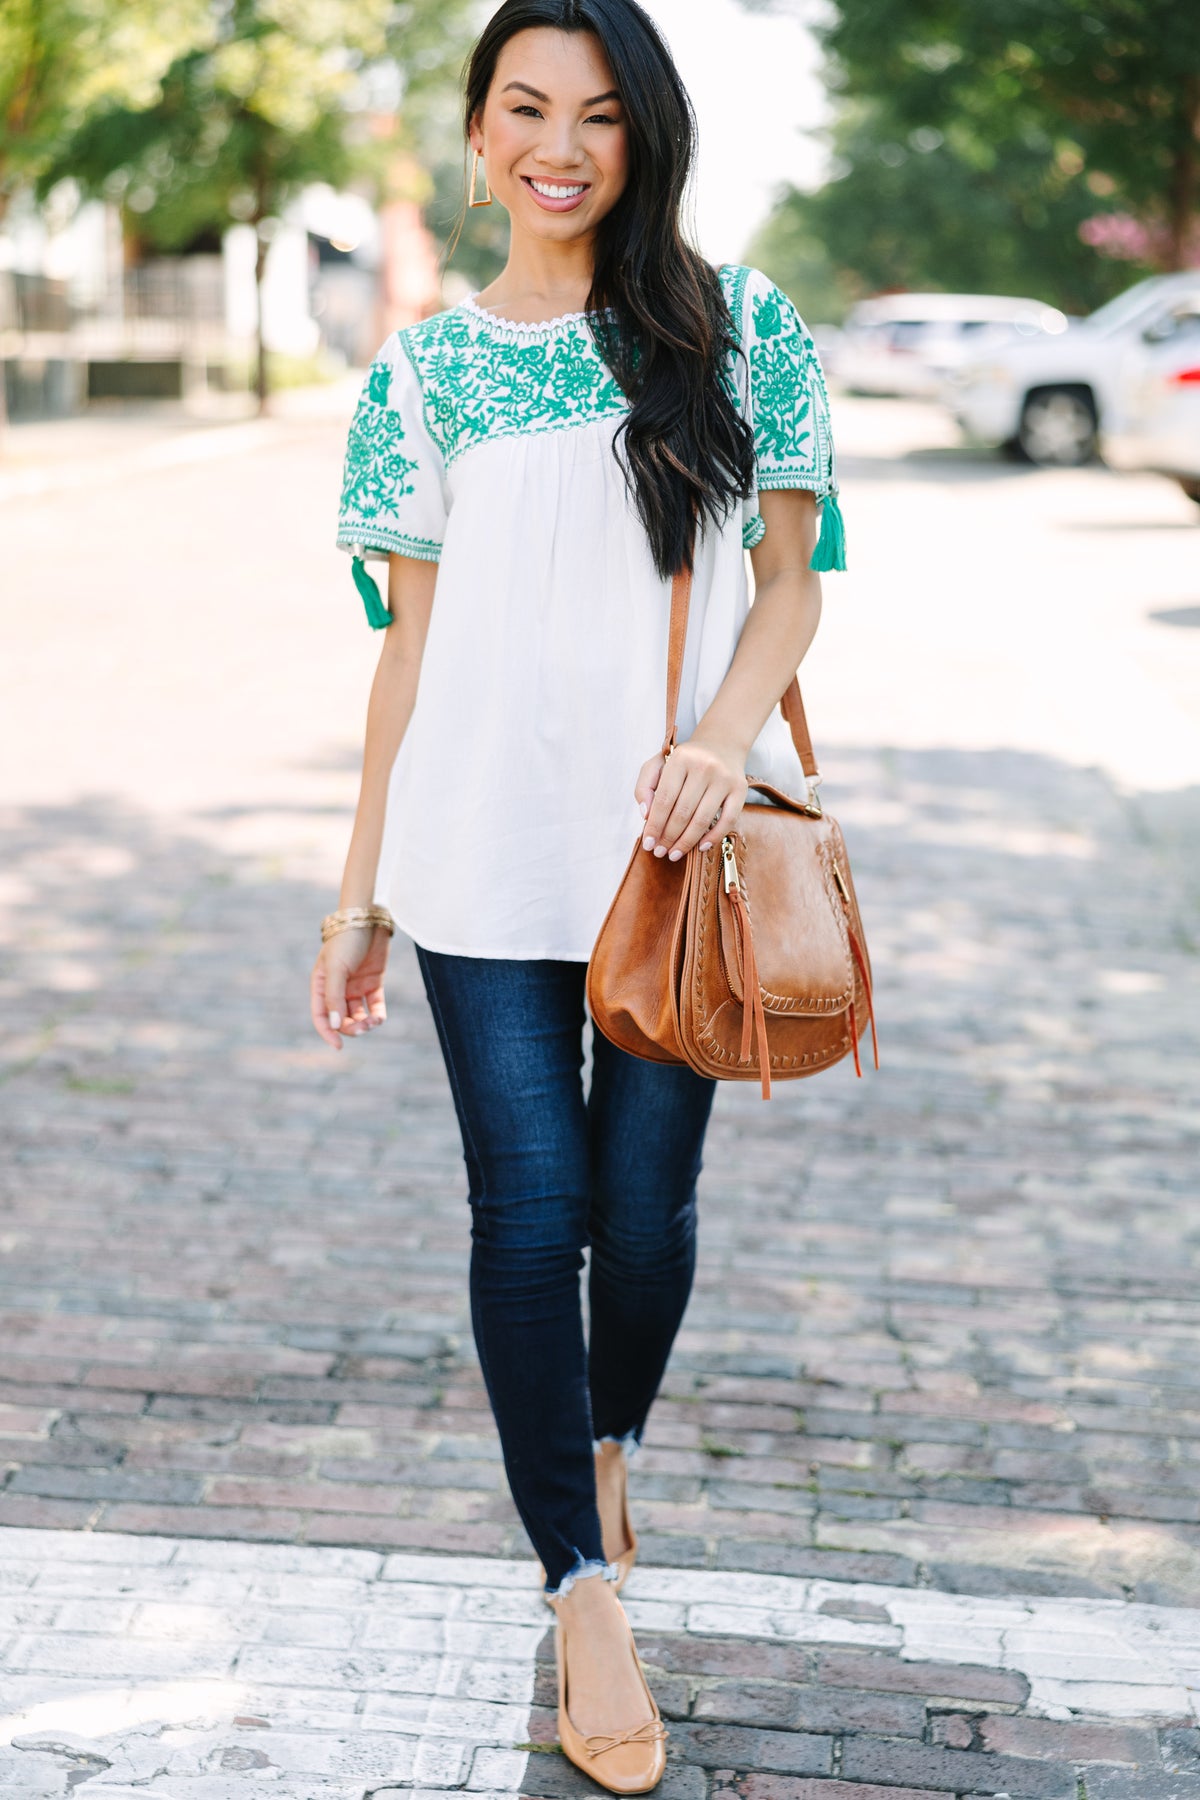 All The Info I Need Green Embroidered Top – Shop the Mint